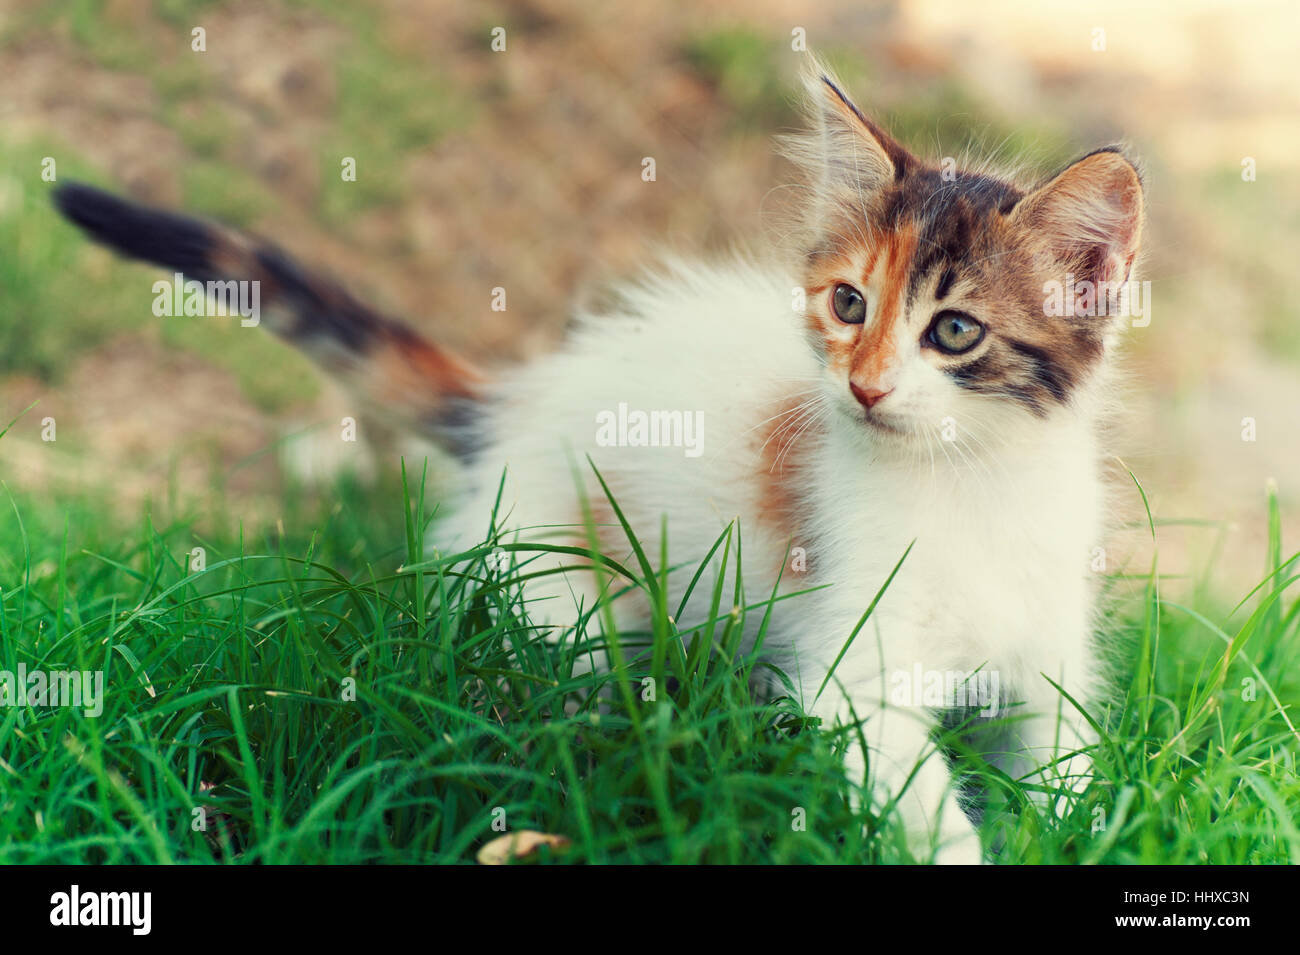 Calico kitten standing in the grass Stock Photo